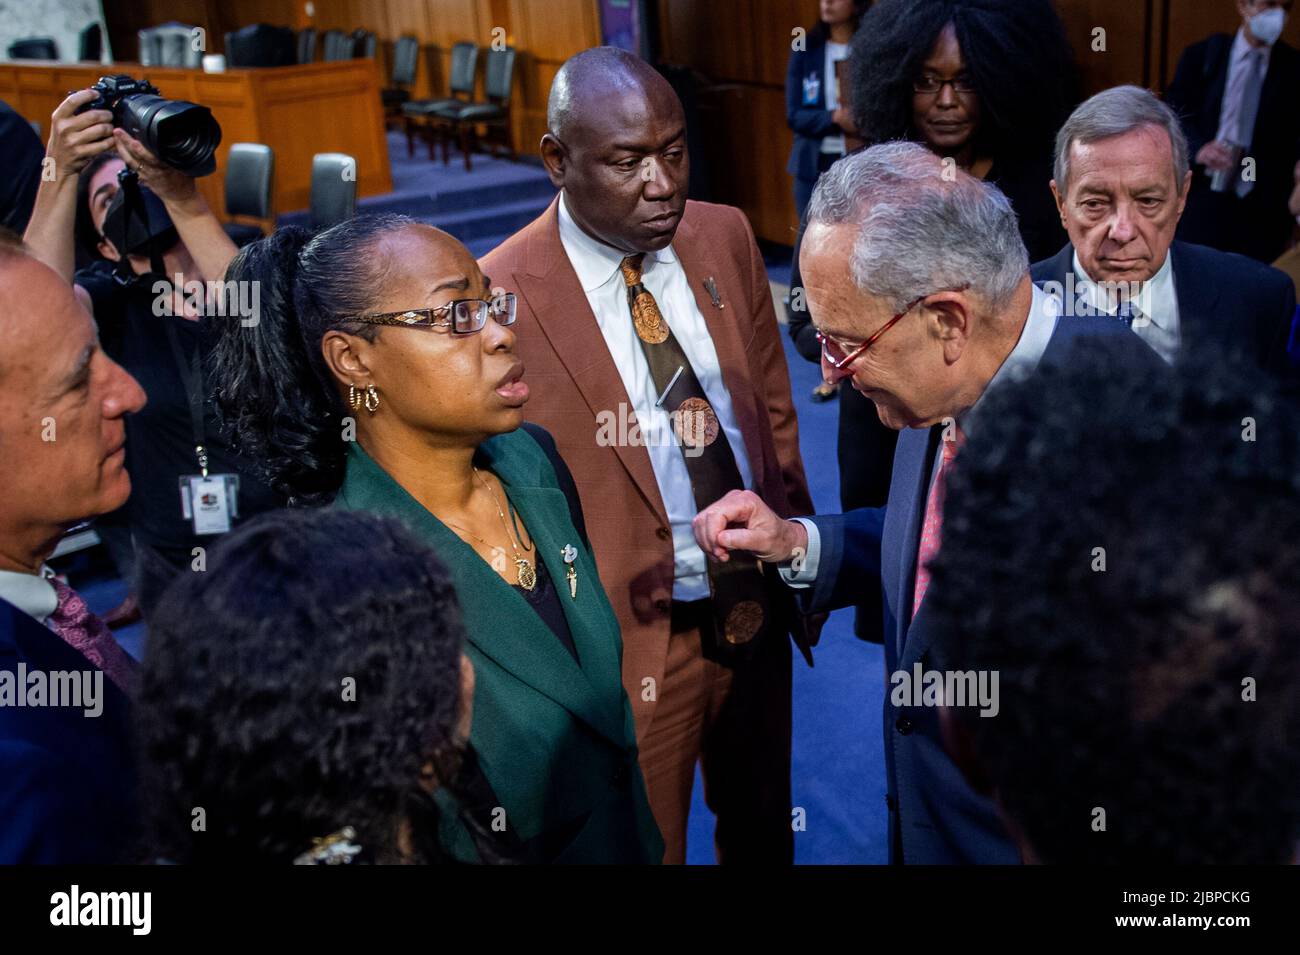 Kimberly Salter, left, wife of Tops Security Guard Aaron Salter, Jr., who died in the Buffalo, New York, Tops supermarket mass shooting implores for United States Senate Majority Leader Chuck Schumer (Democrat of New York), right, to âdo somethingâ, following a Senate Committee on the Judiciary hearing to examine domestic terrorism threat after the Buffalo attack, in the Hart Senate Office Building in Washington, DC, Tuesday, June 7, 2022. Credit: Rod Lamkey/CNP Stock Photo